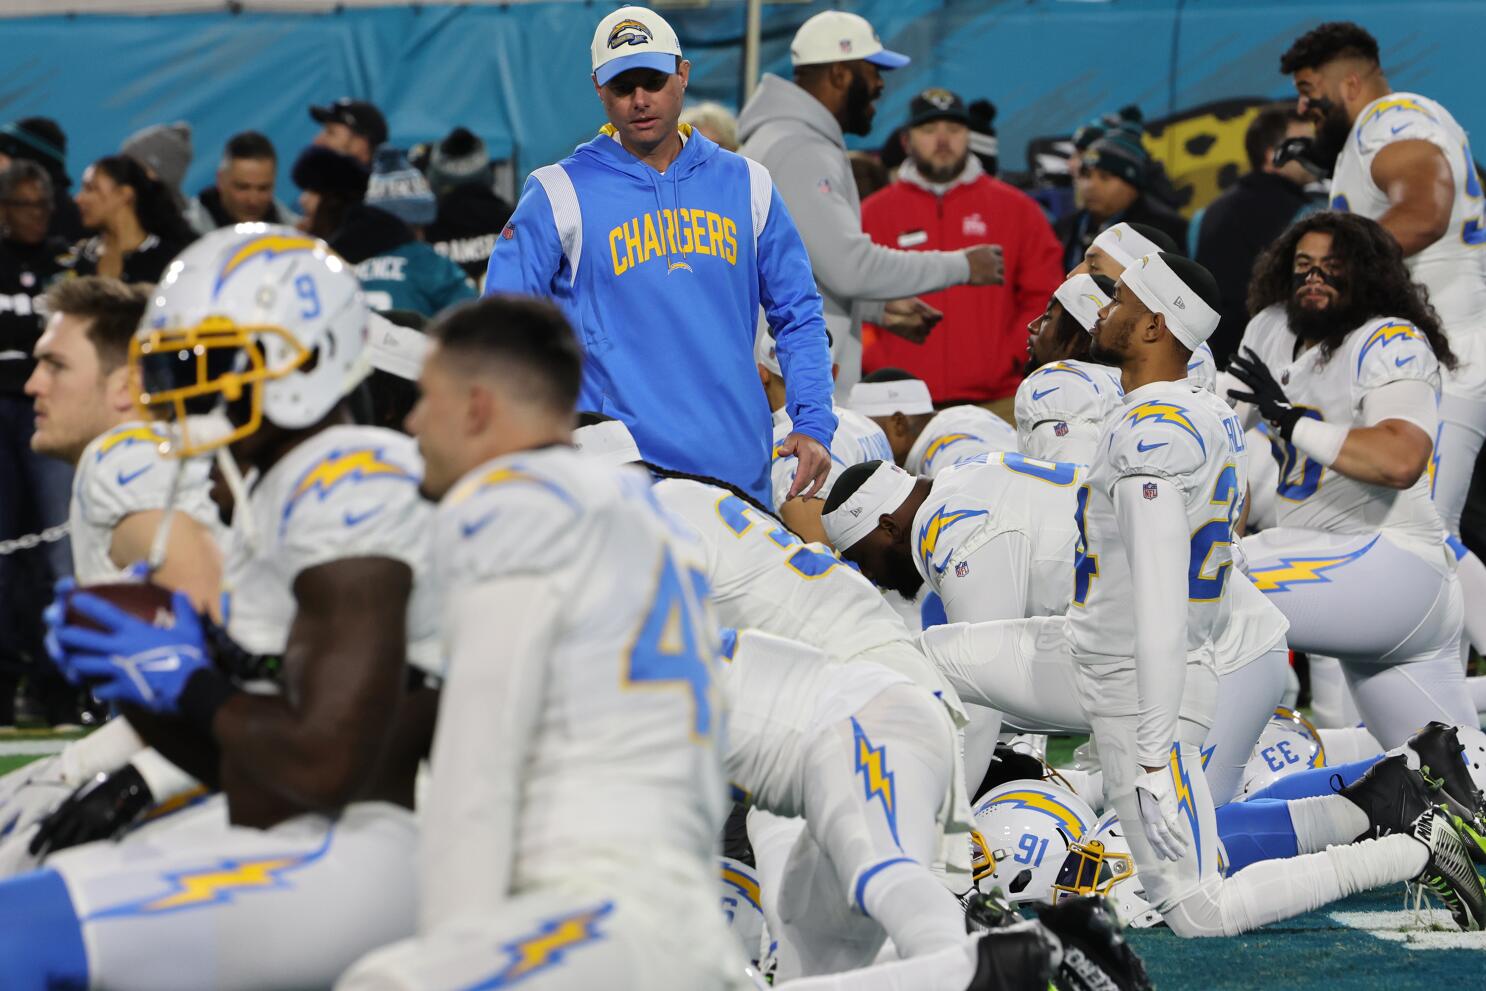 Los Angels Chargers playoff gear and apparel 2022-23